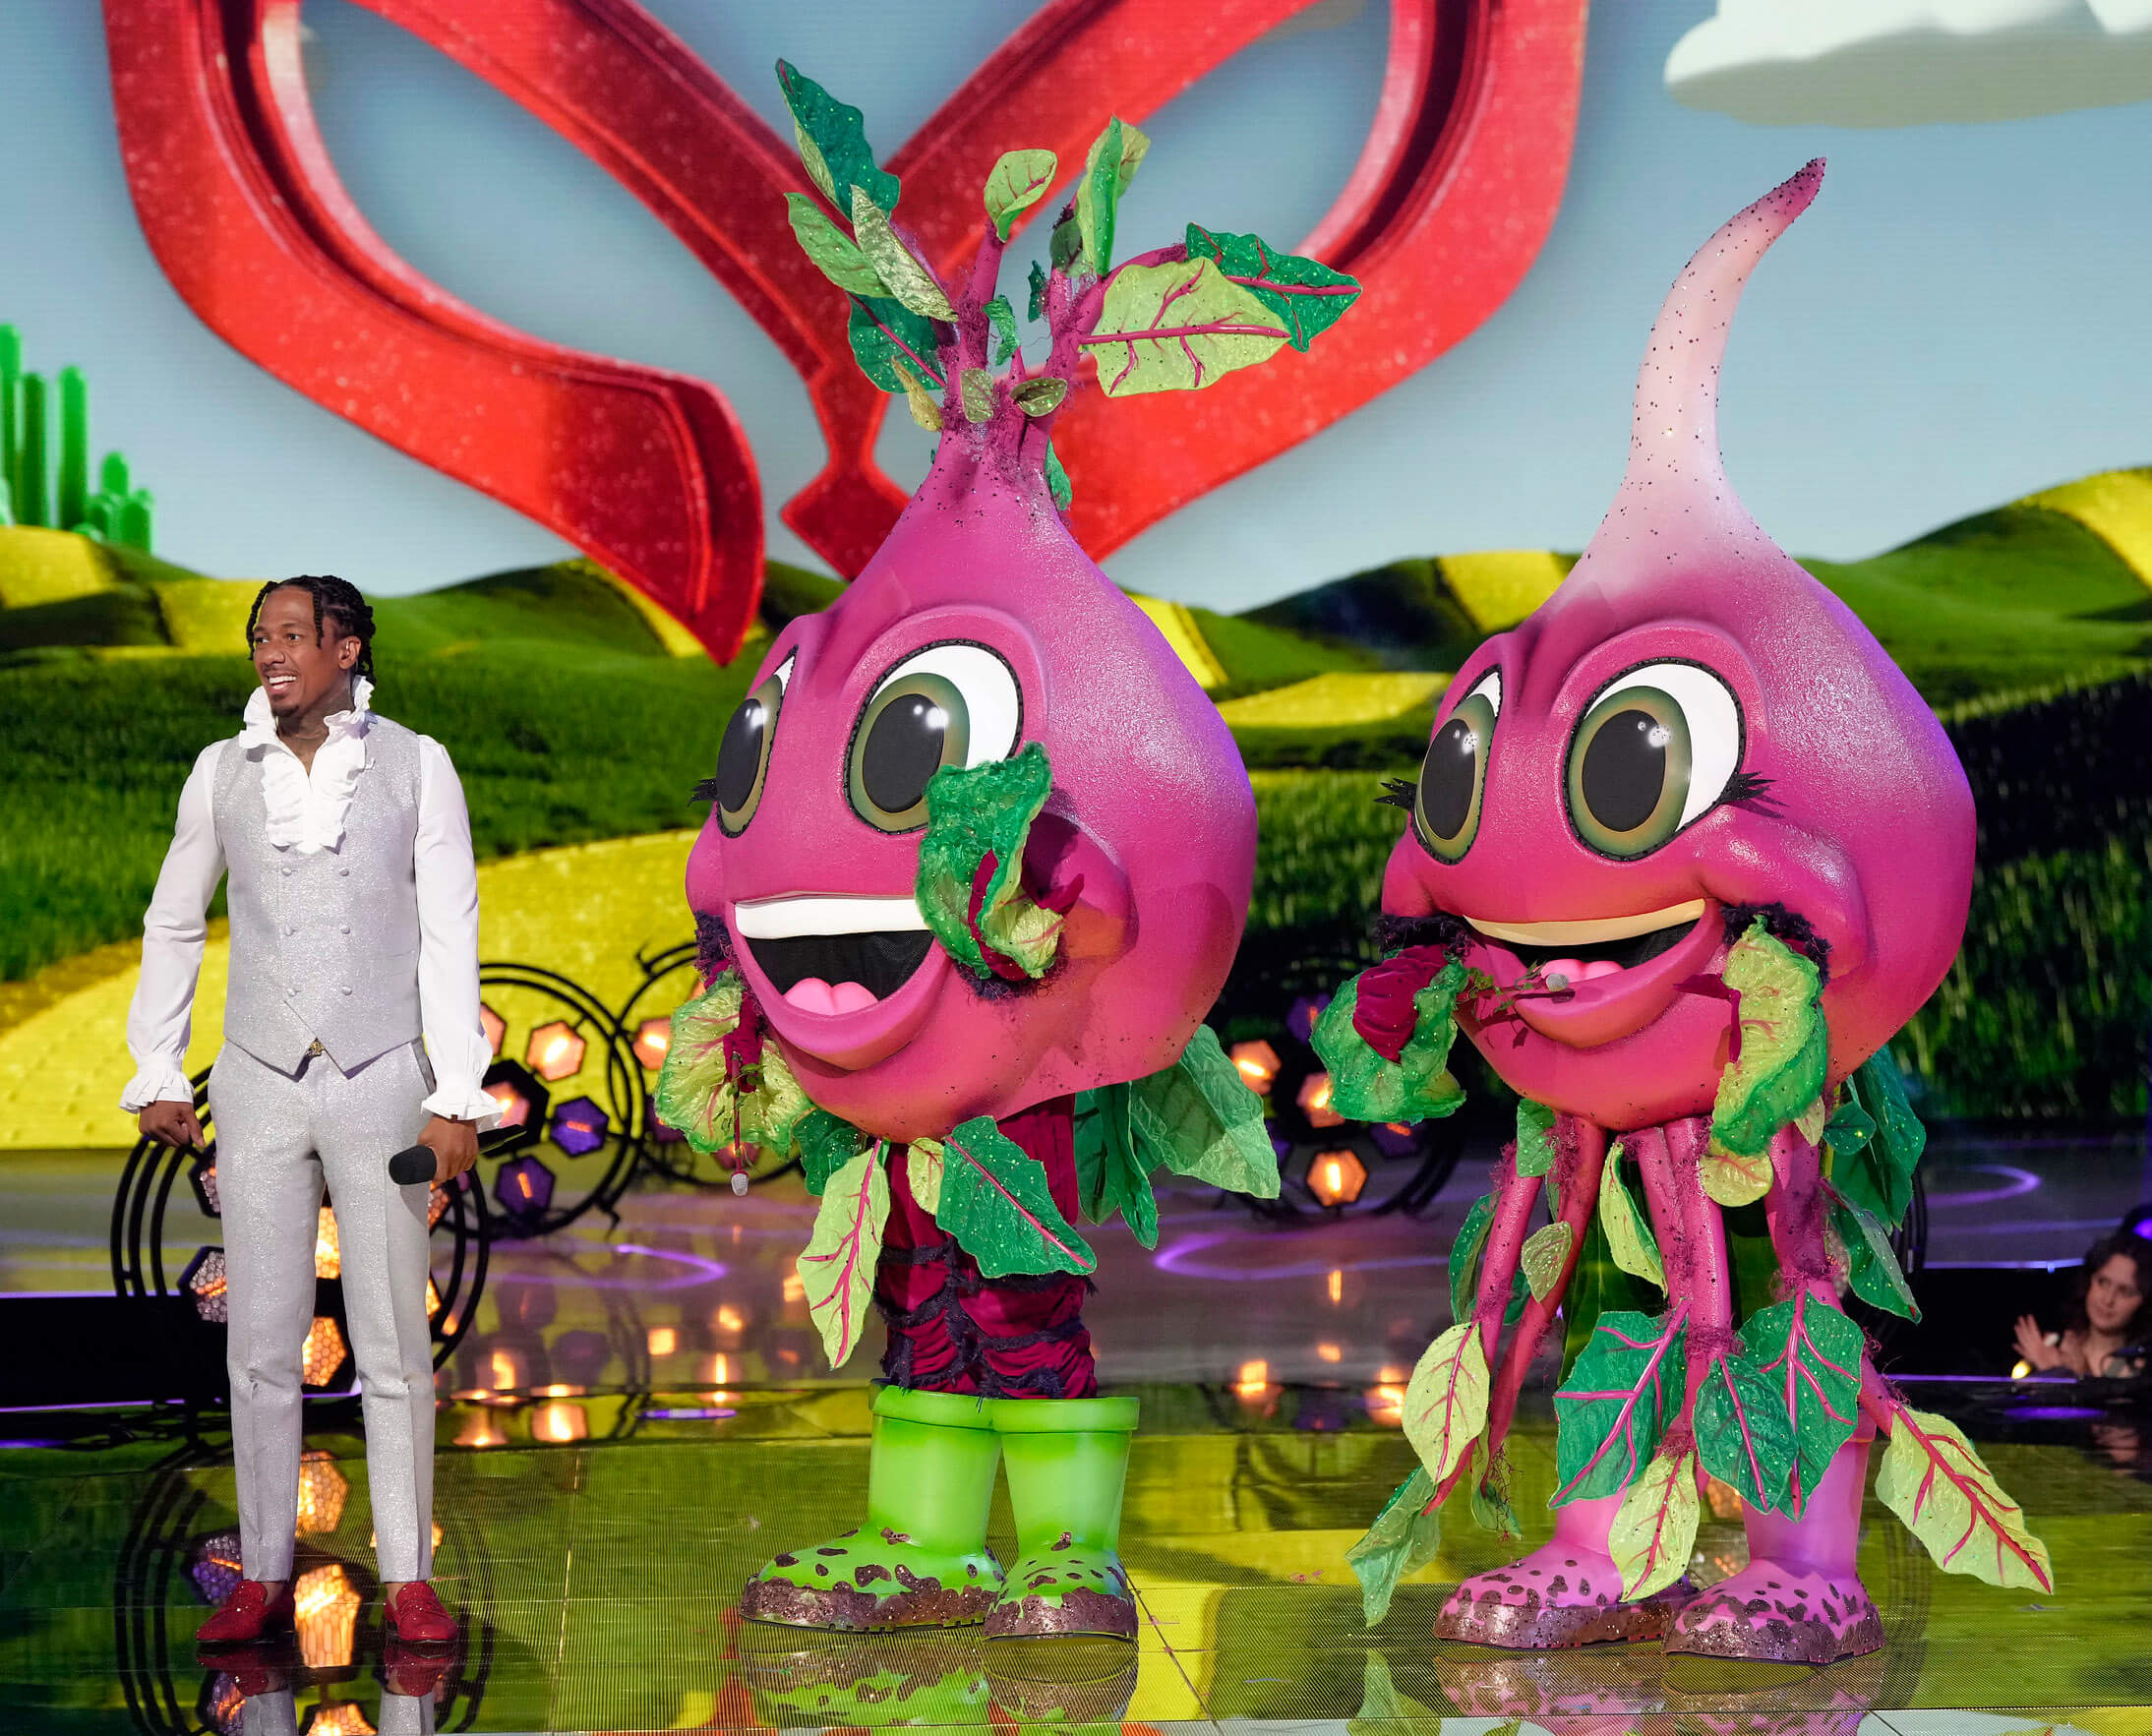 'The Masked Singer' Season 11 Group B costume, the Beets, standing next to Nick Cannon